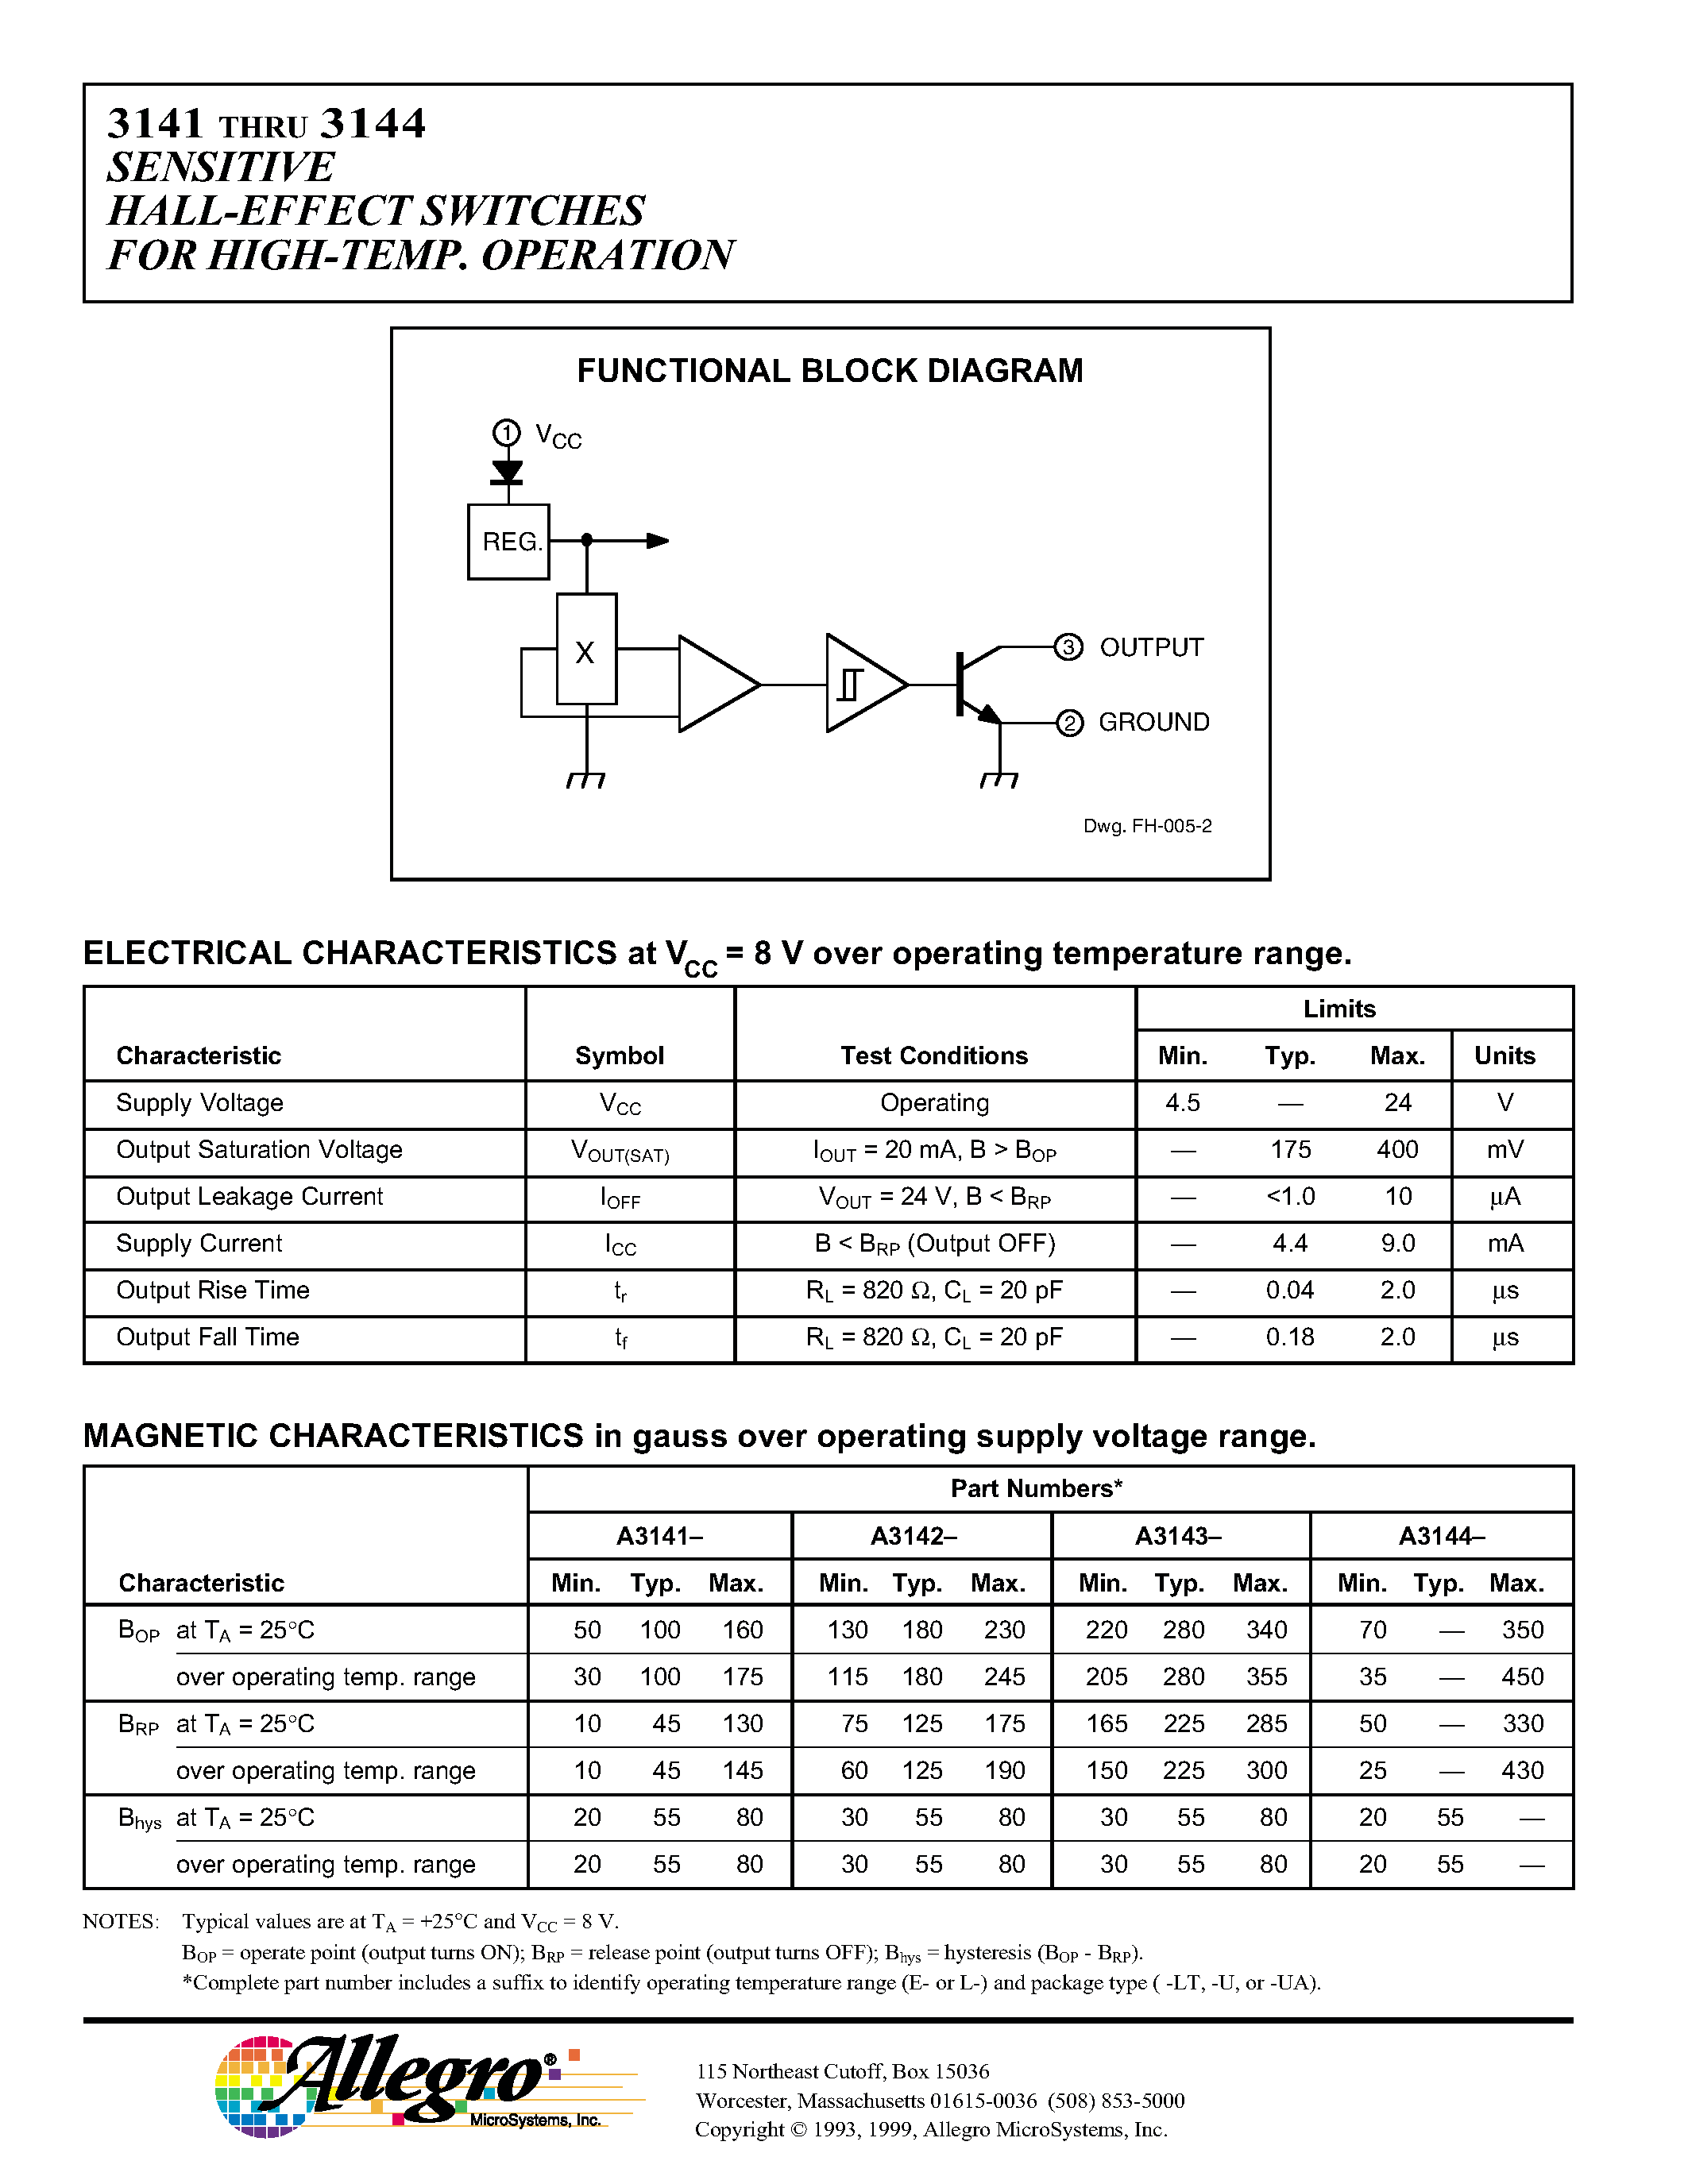 Даташит A3141-U - SENSITIVE HALL-EFFECT SWITCHES FOR HIGH-TEMPERATURE OPERATION страница 2